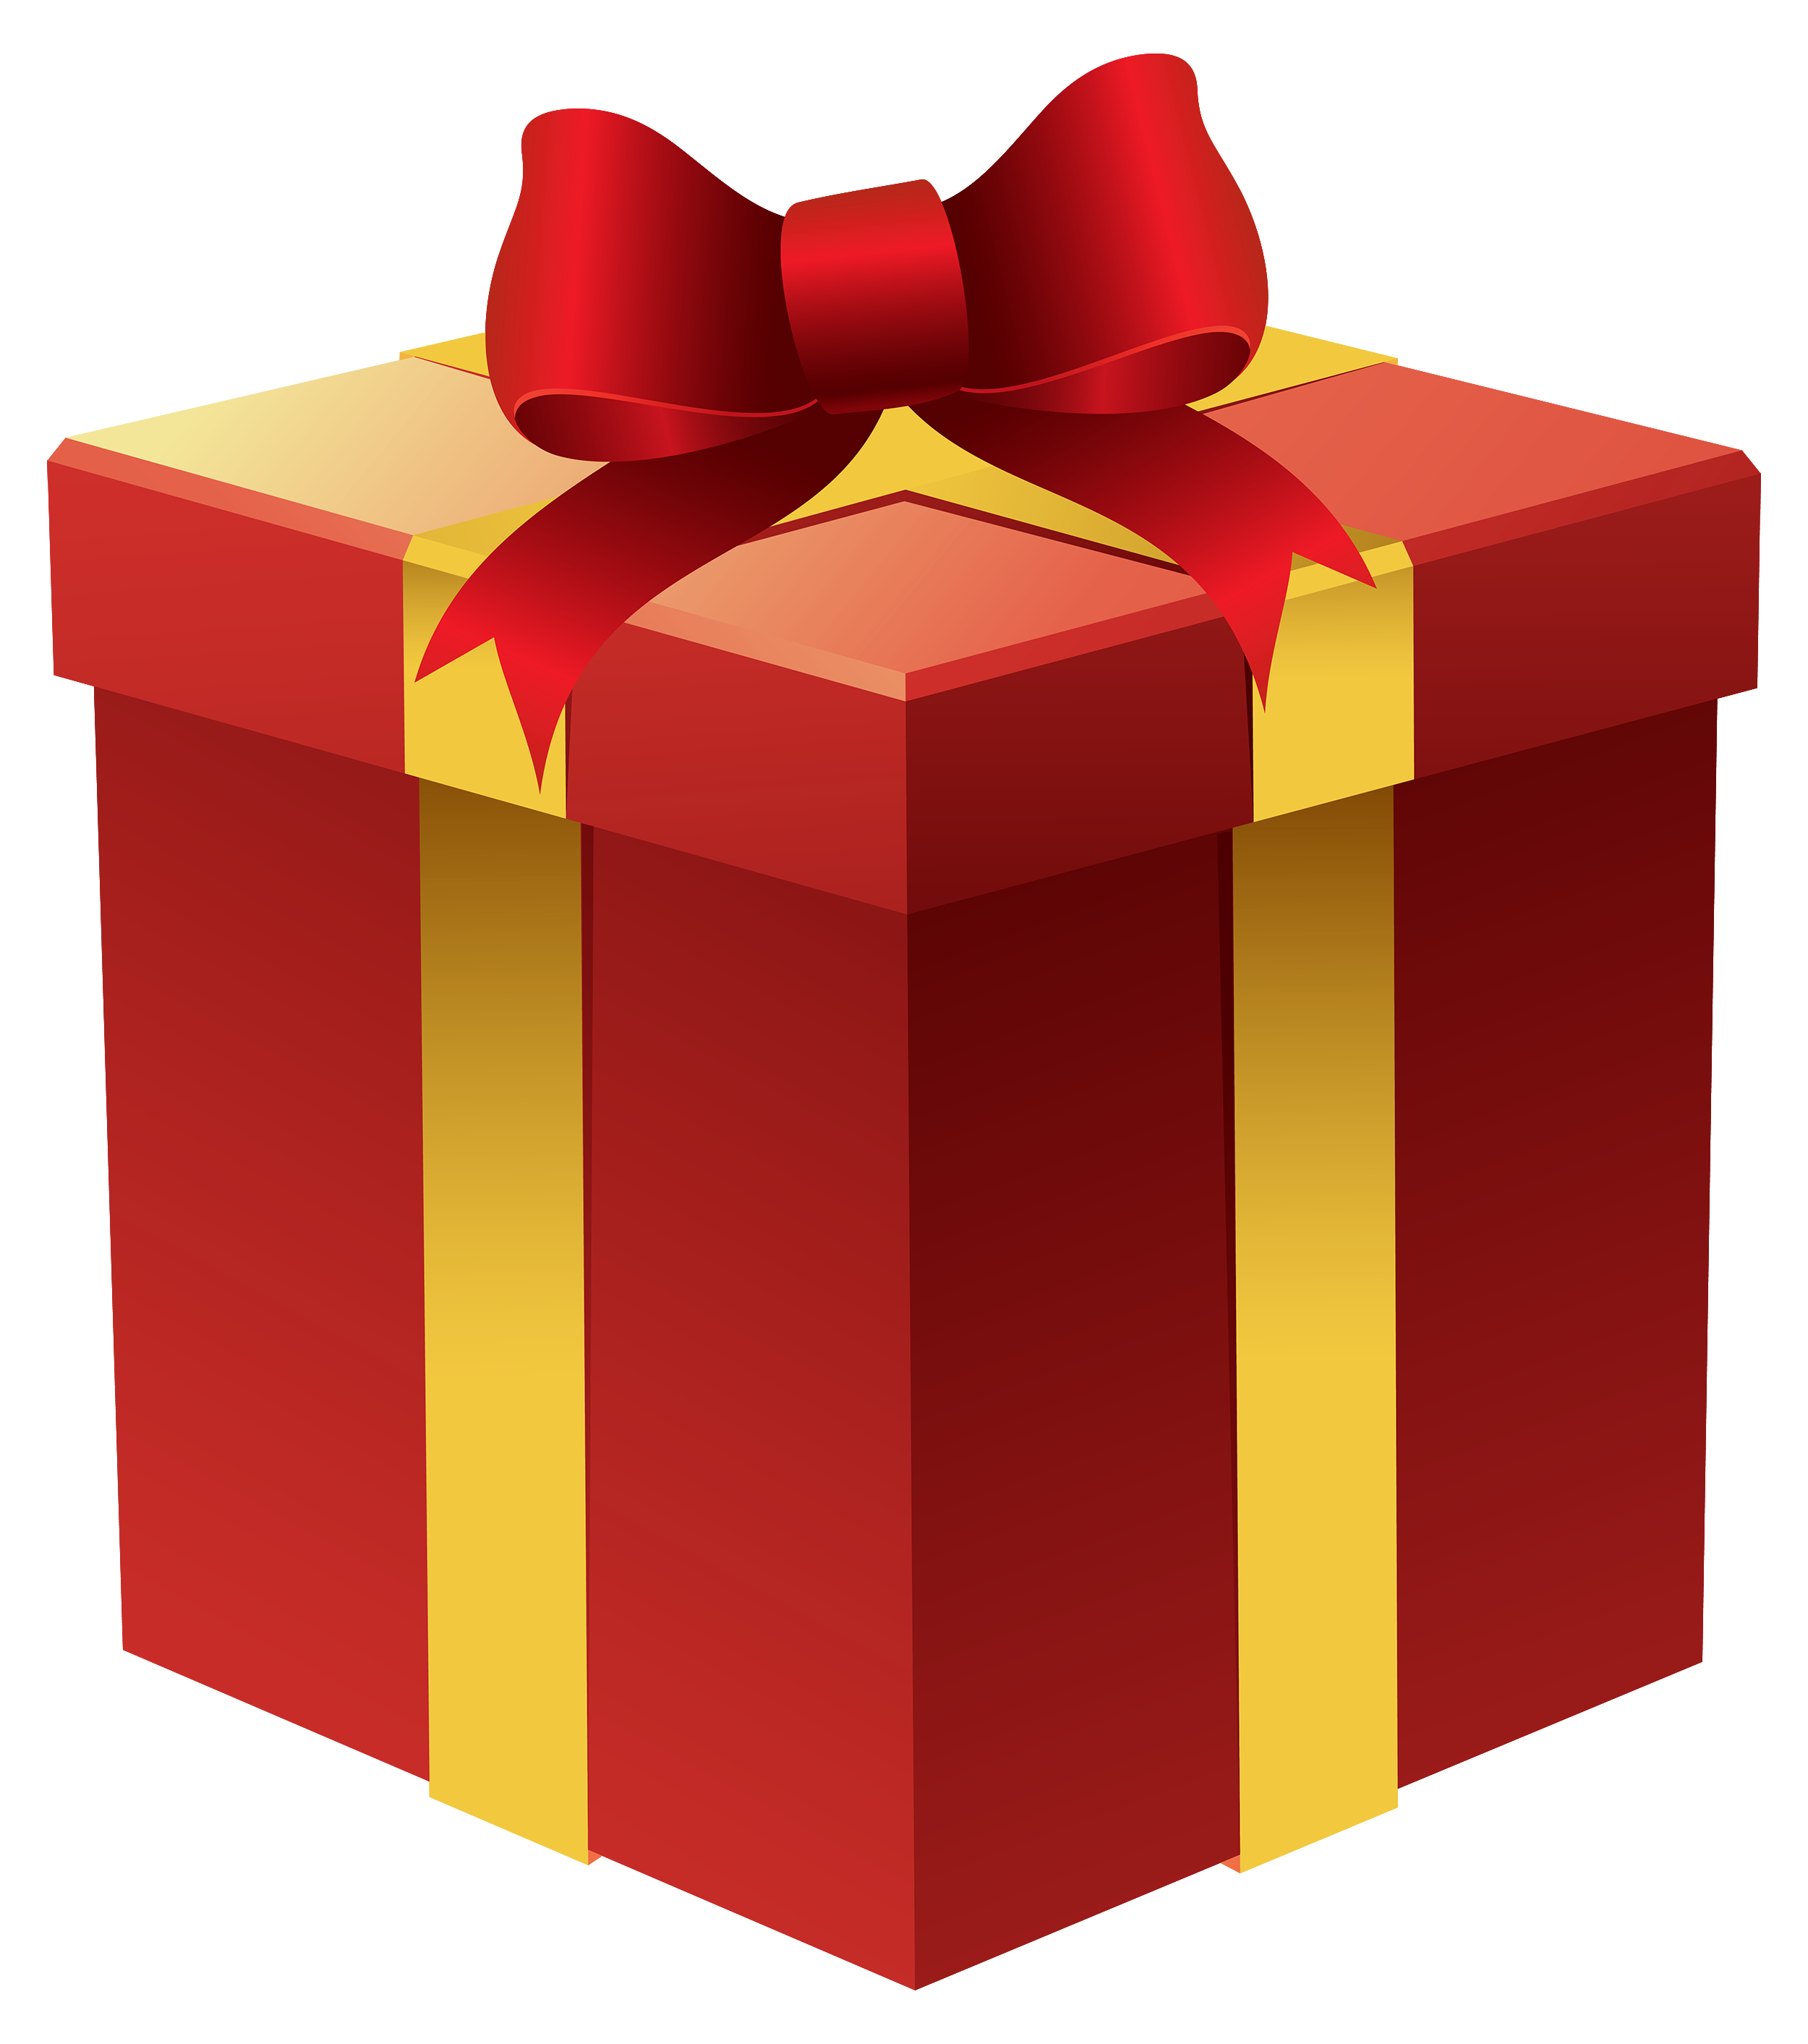 regalos gifts clipart download image